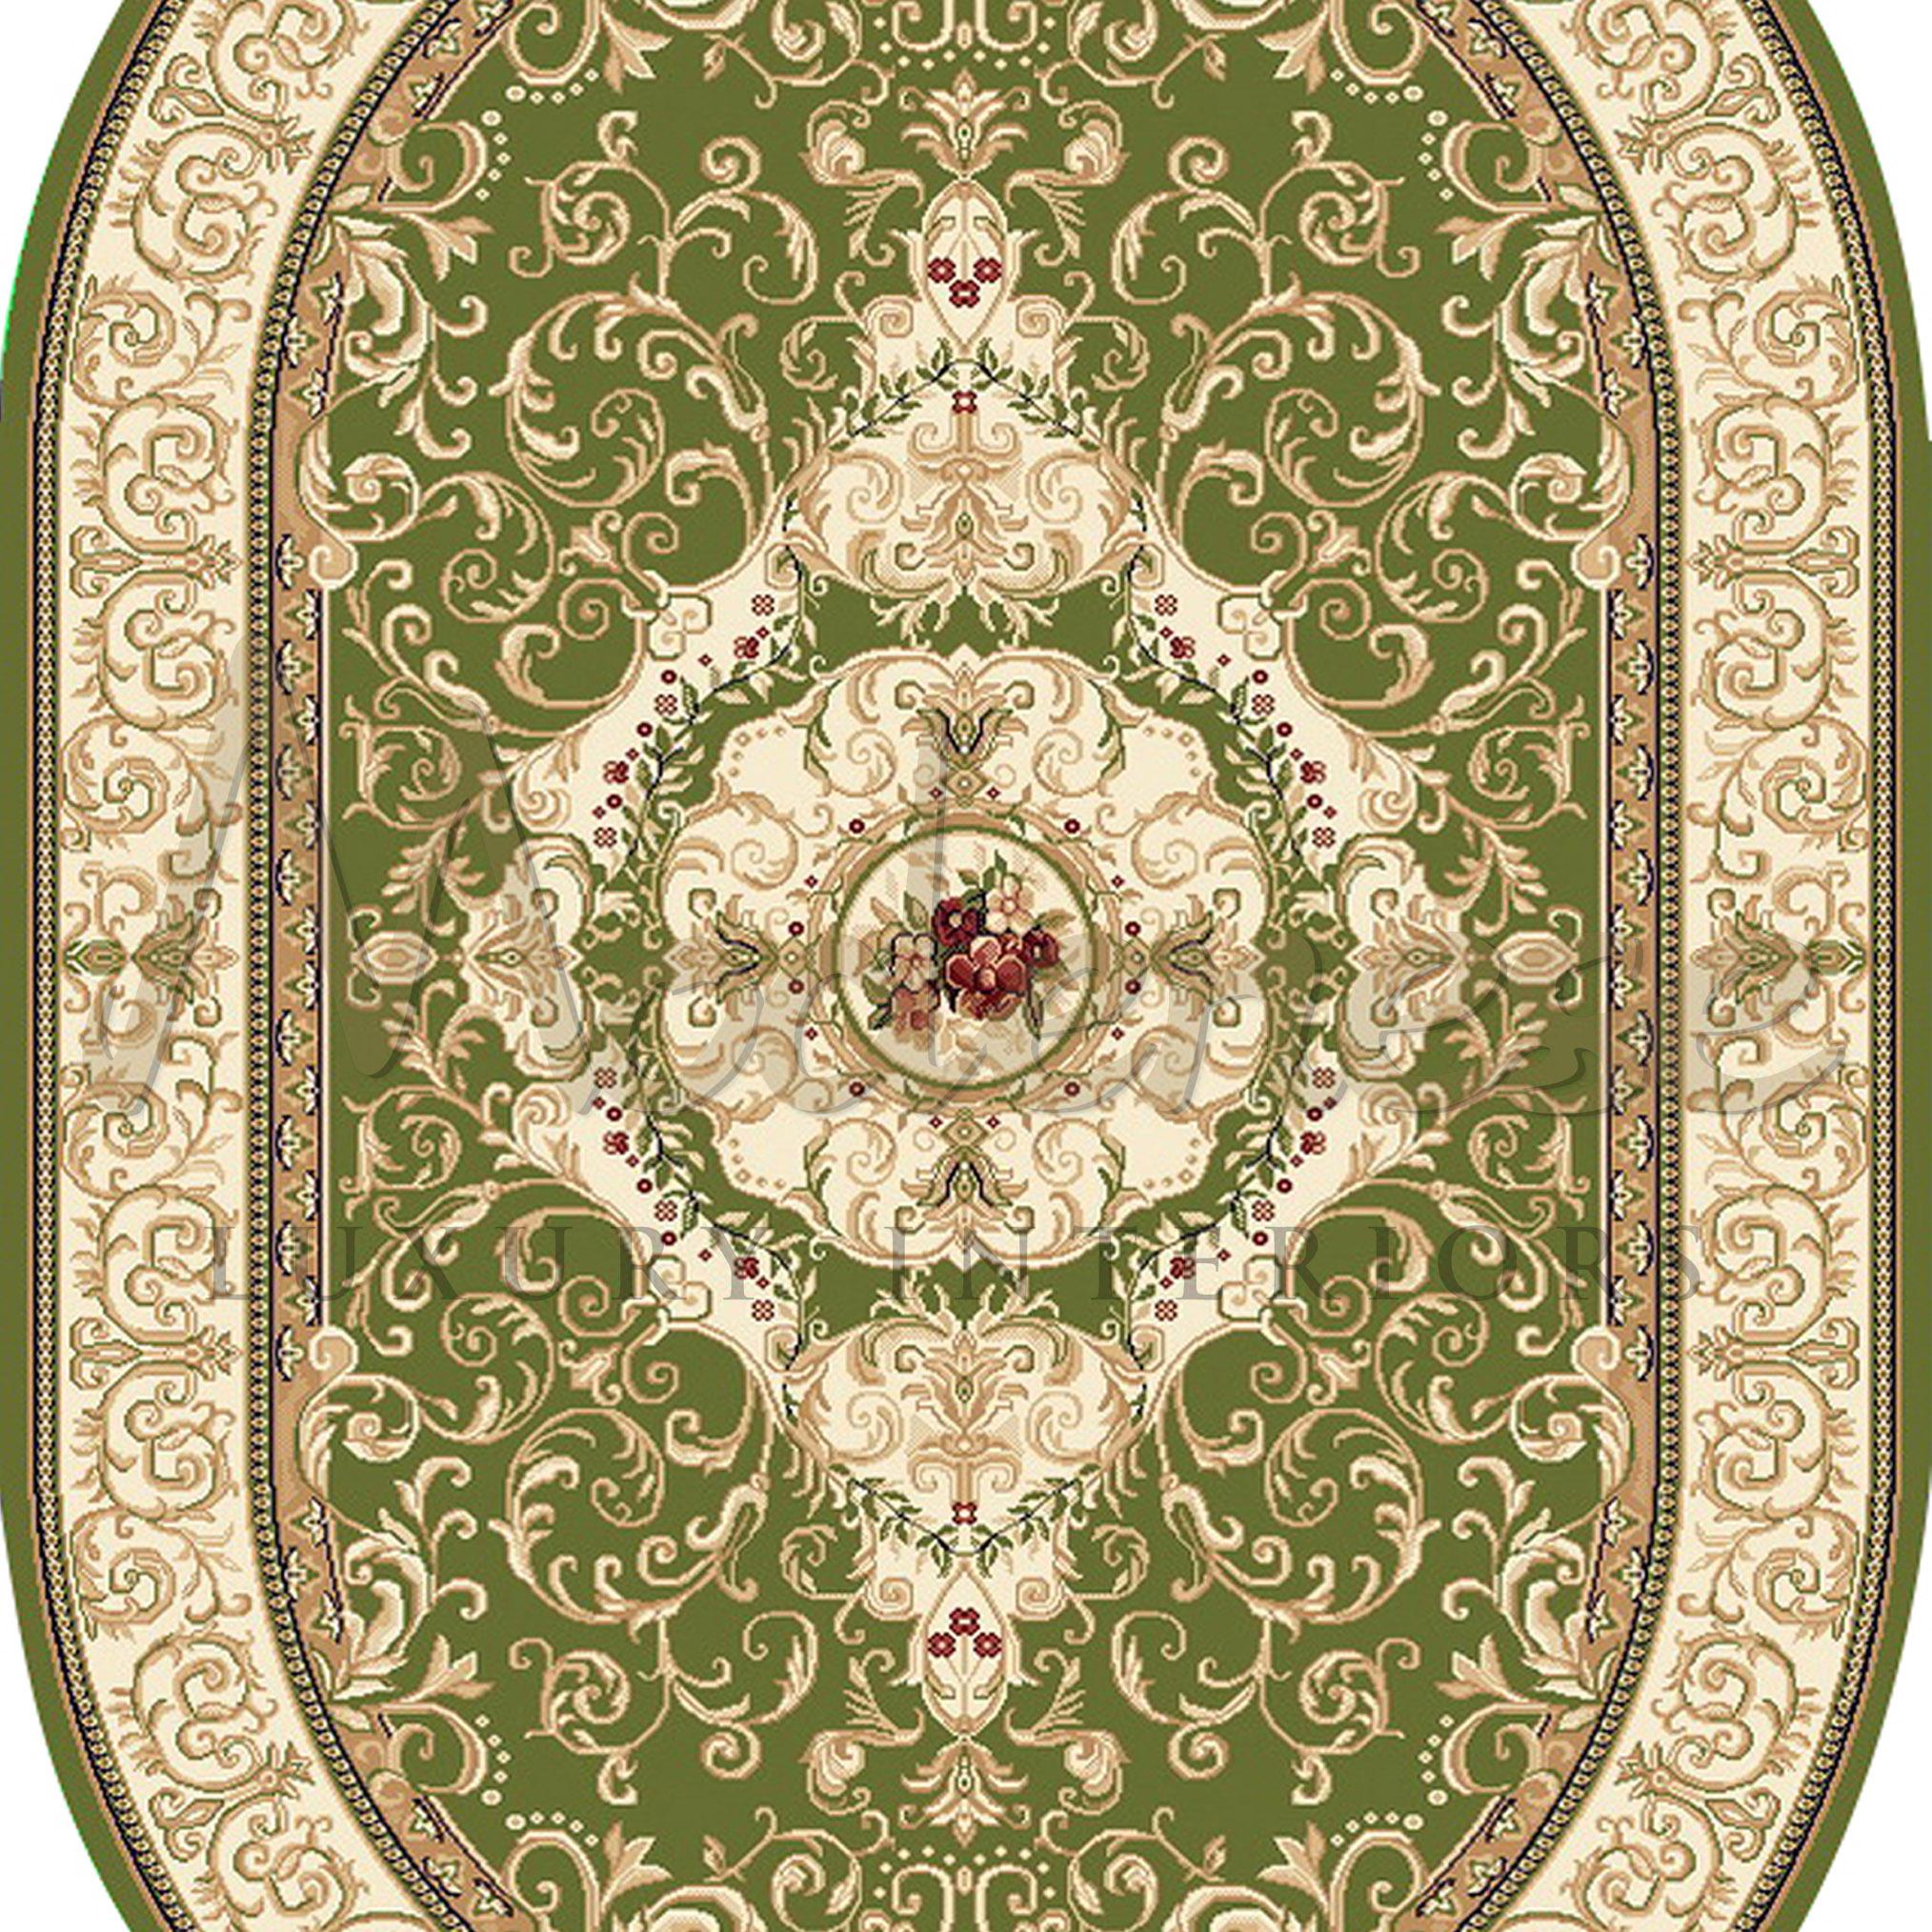 Cotton 21st Century Handknotted Oval Bamboo Silk Rug by Modenese Interiors, Scarlet For Sale